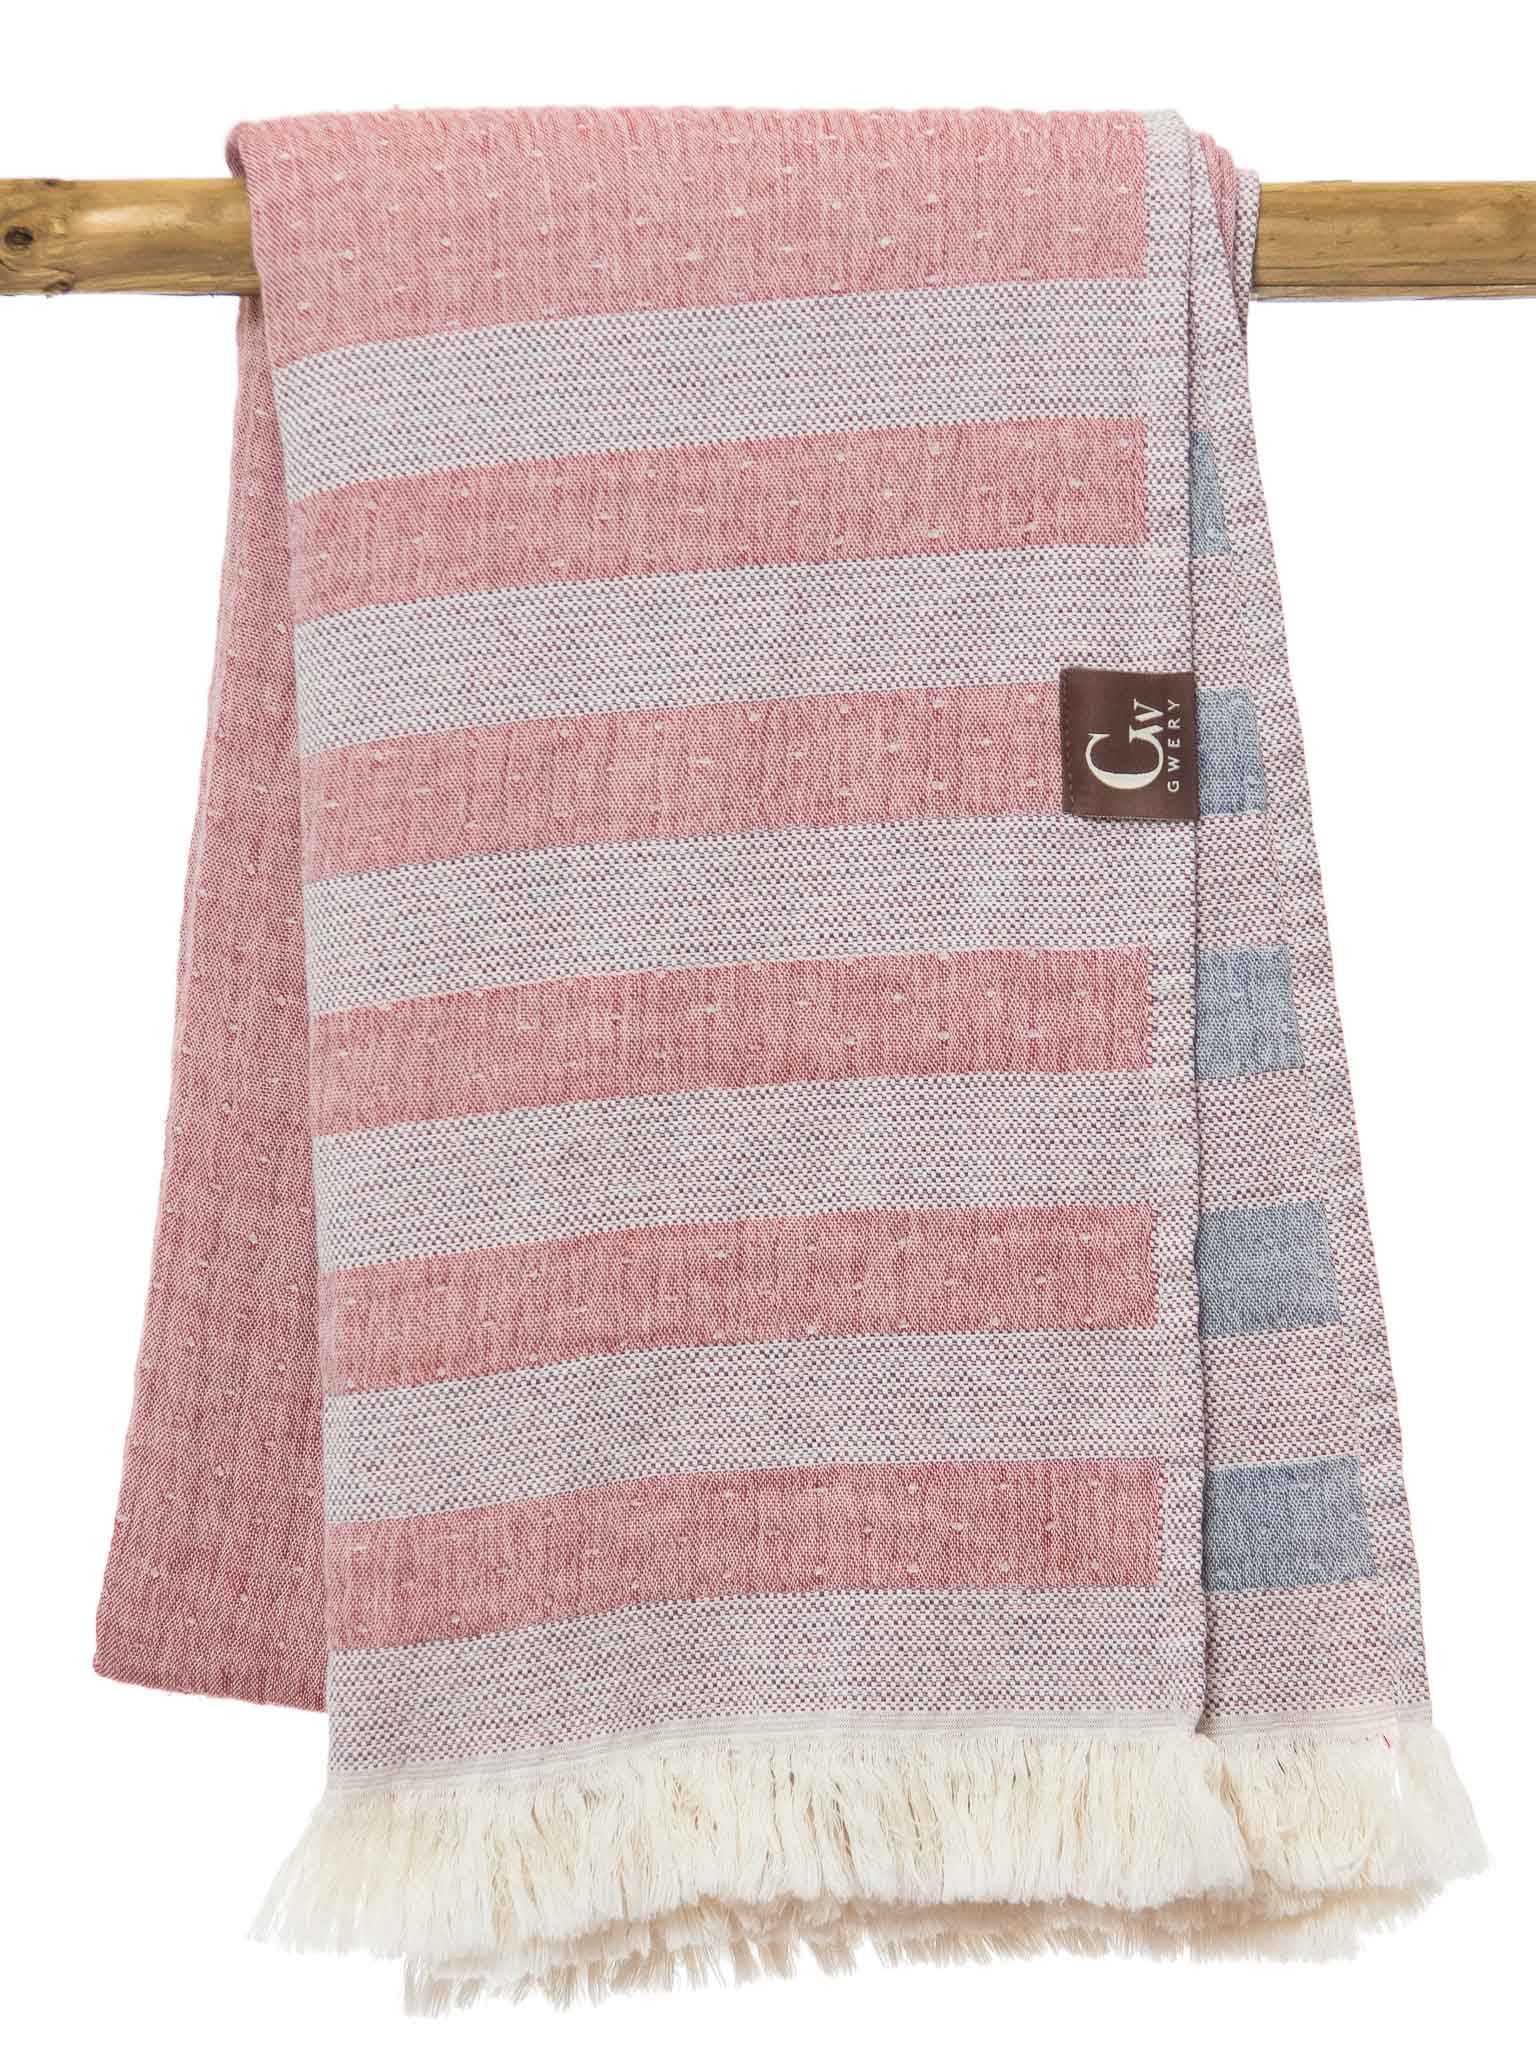 Red and blue double sided striped beach towel folded